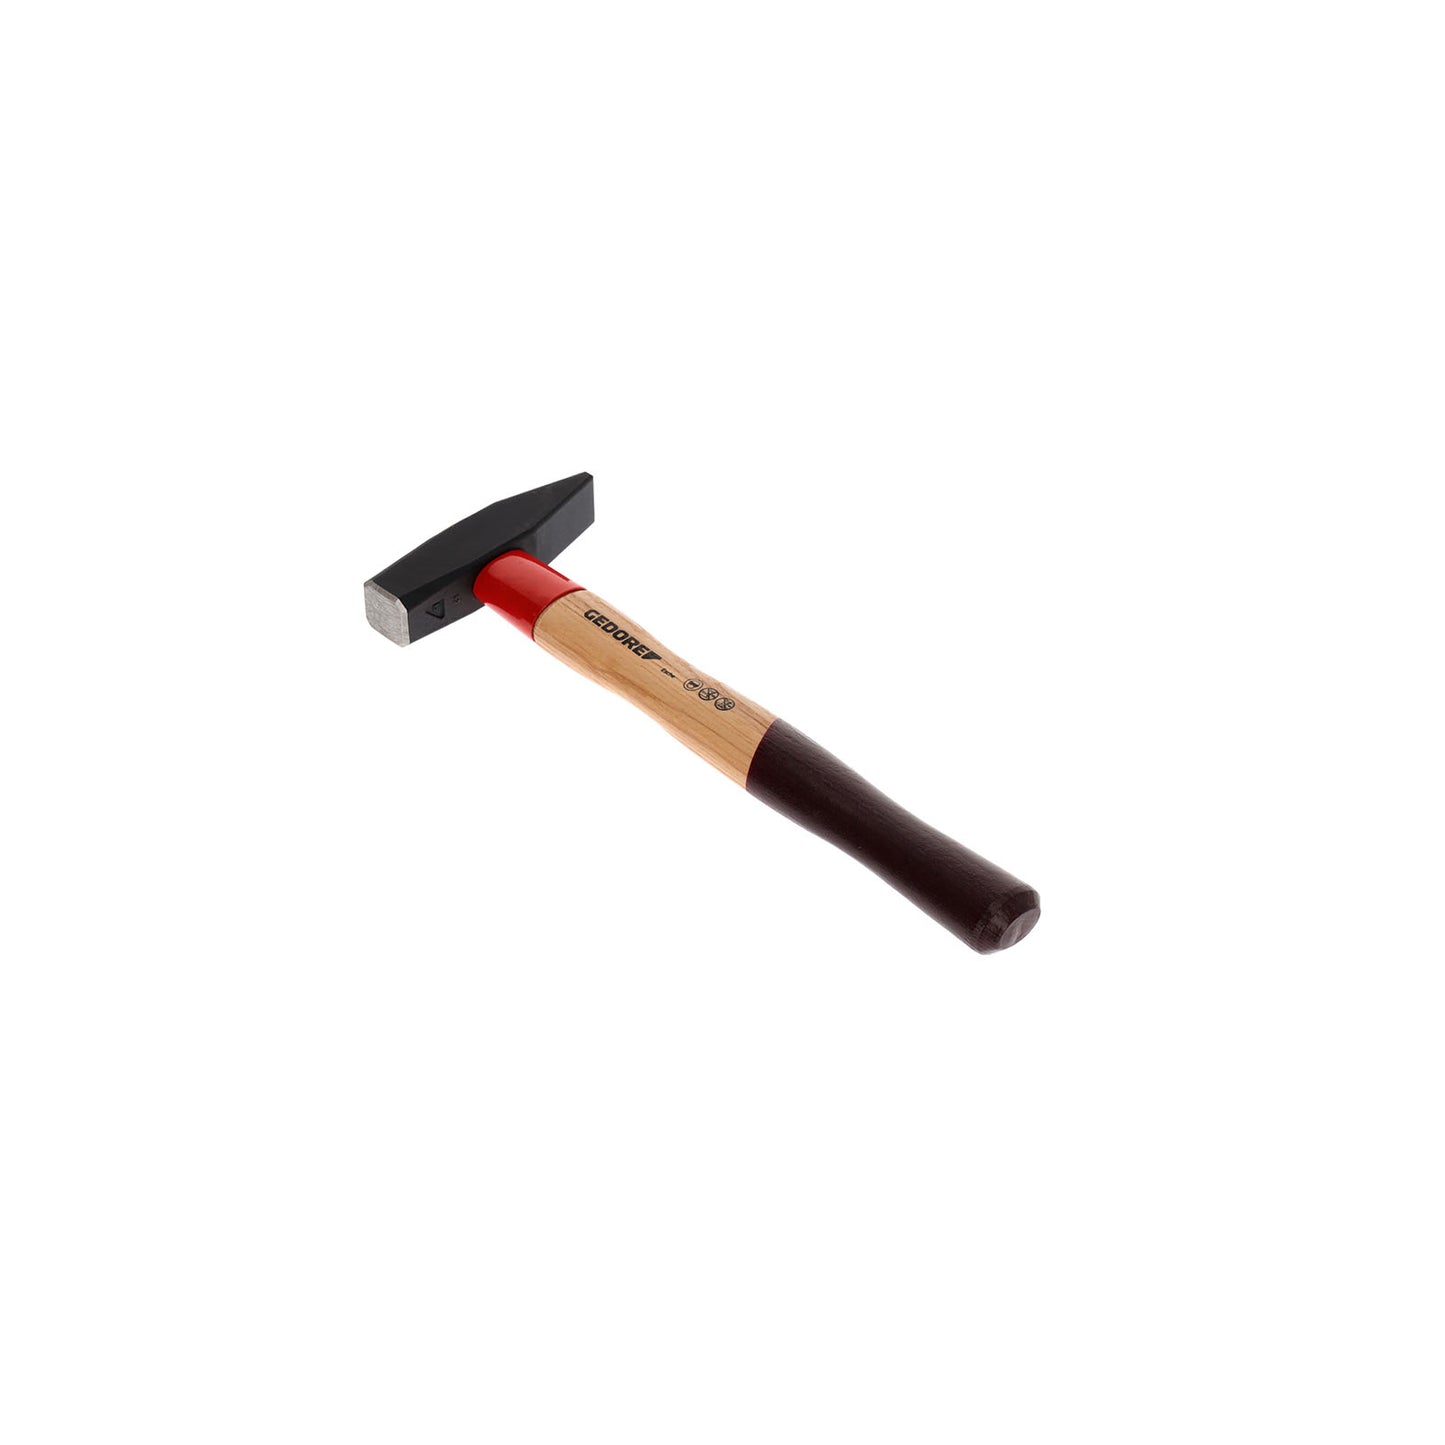 GEDORE 600 E-500 - ROTBAND assembly hammer 500g (8582260)